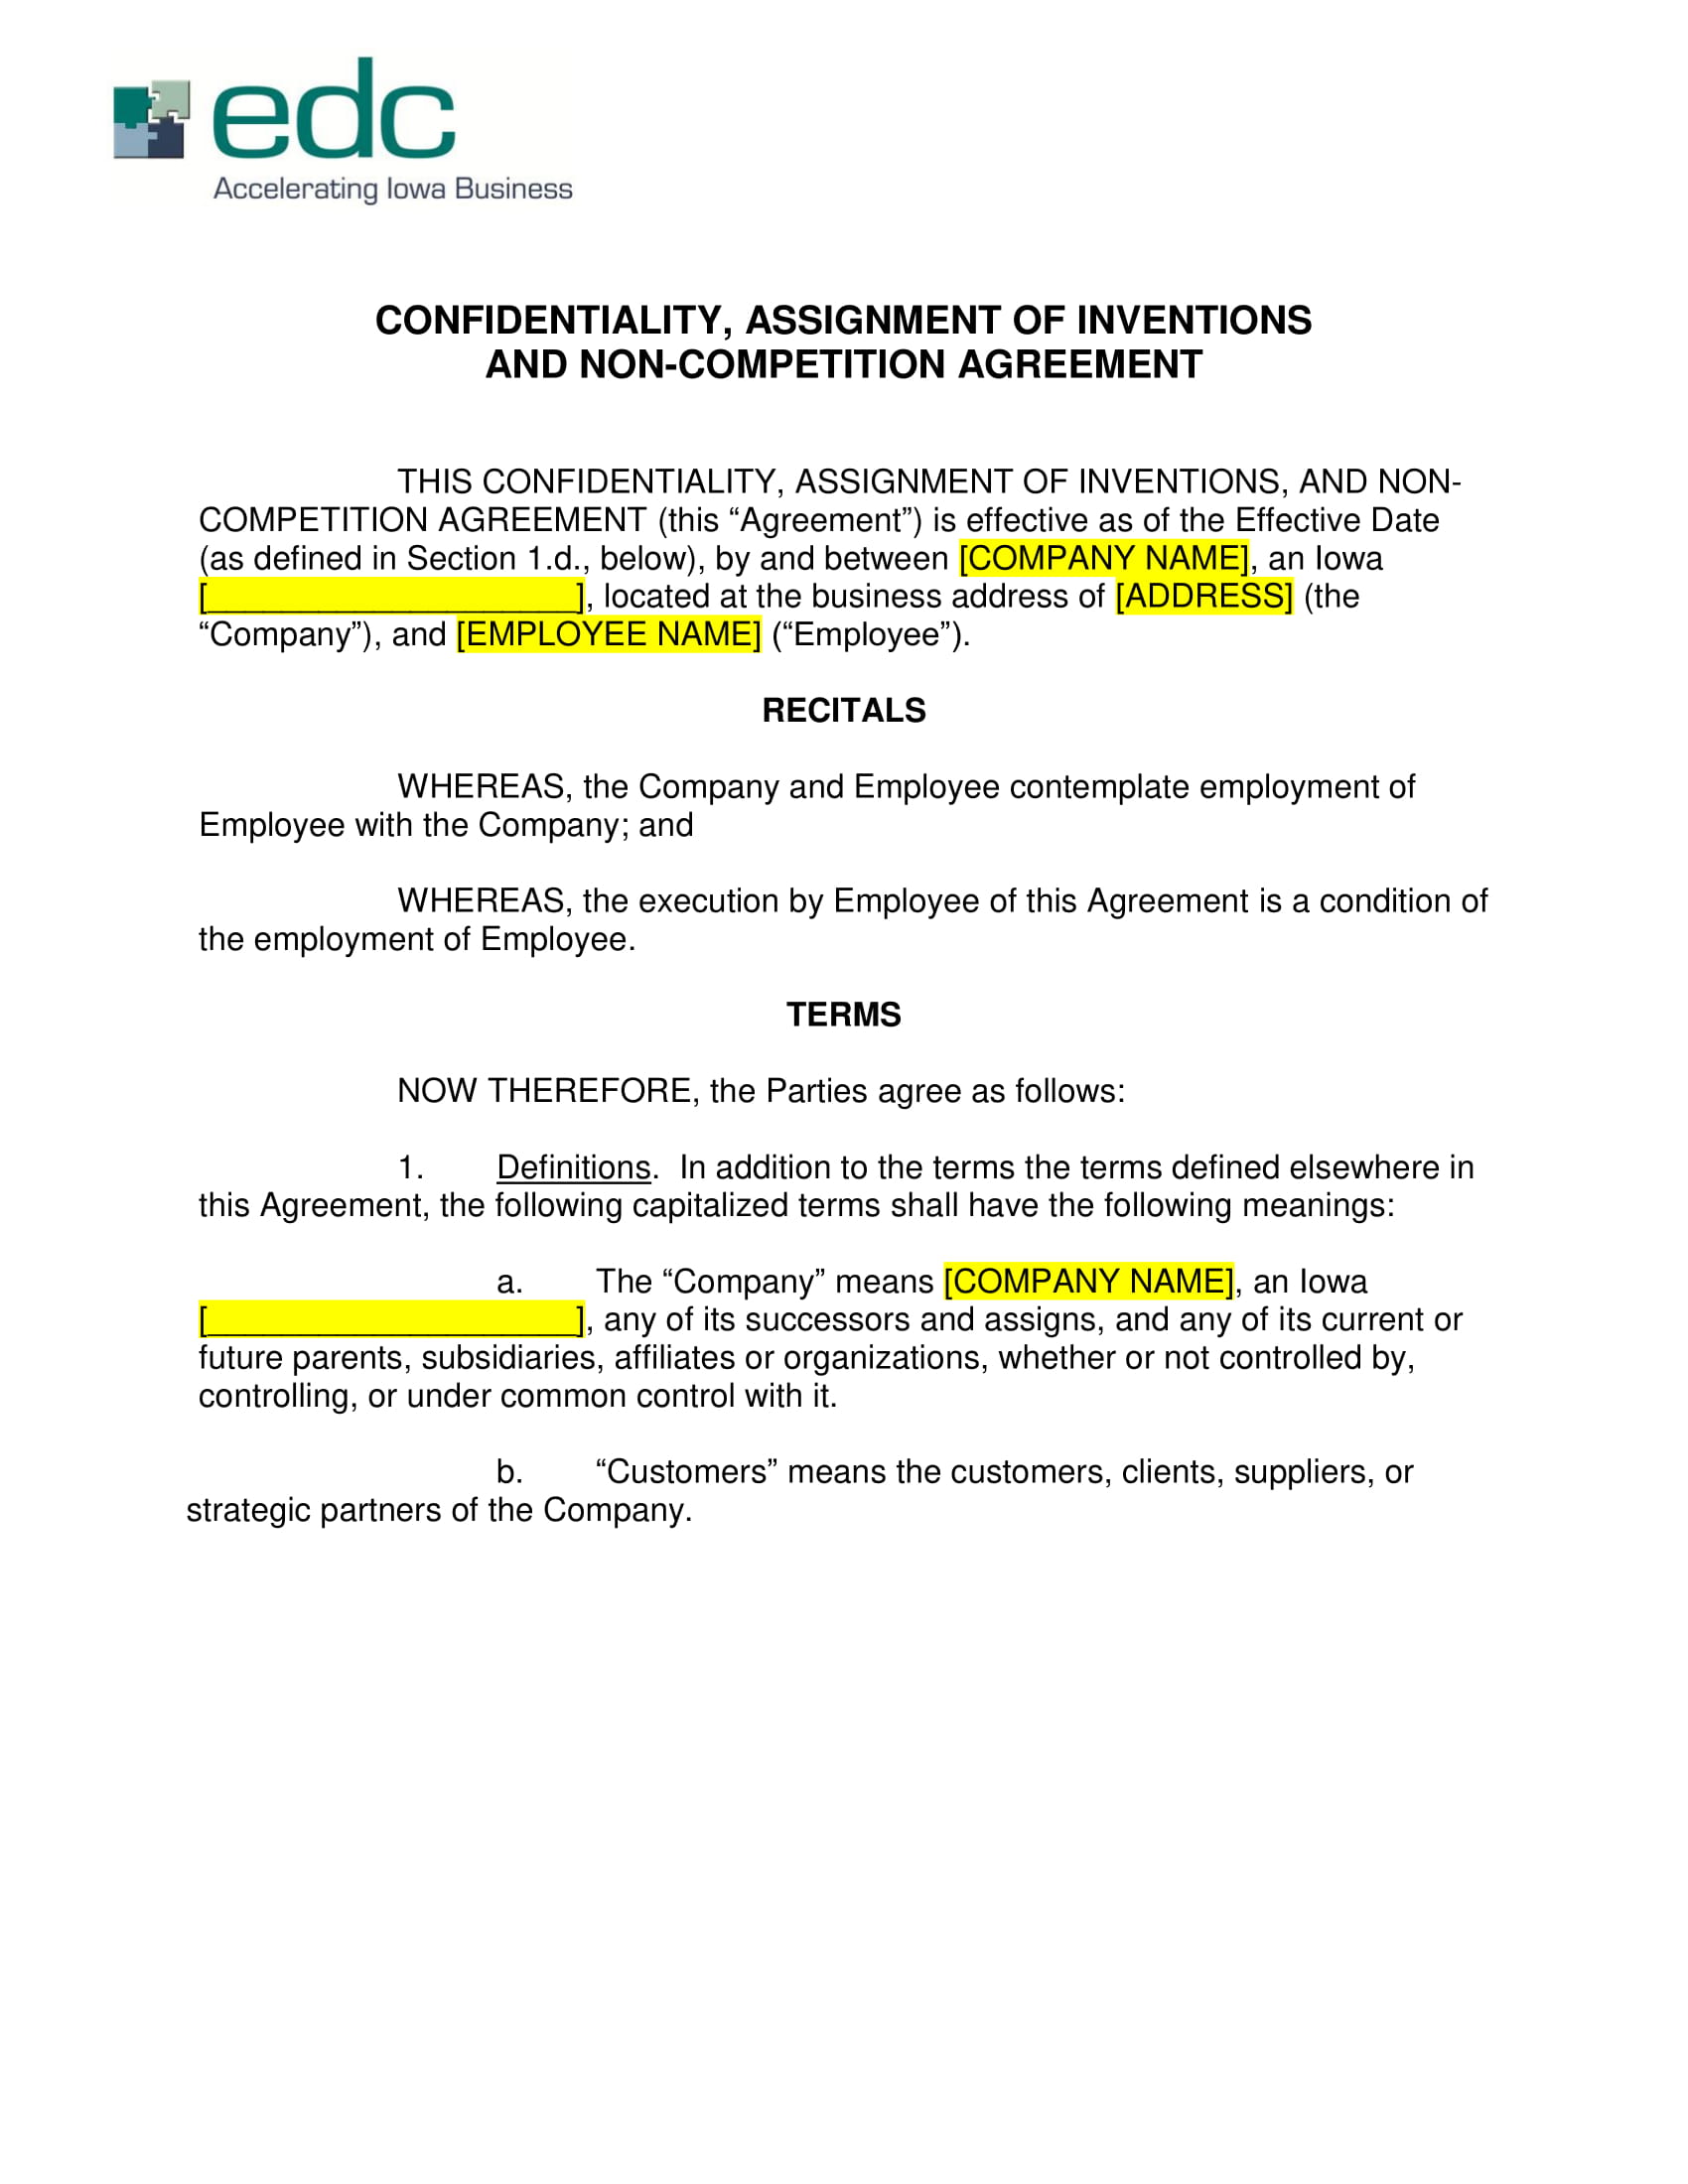 Confidentiality, Assignment of Inventions and Non-Competition Agreement Example